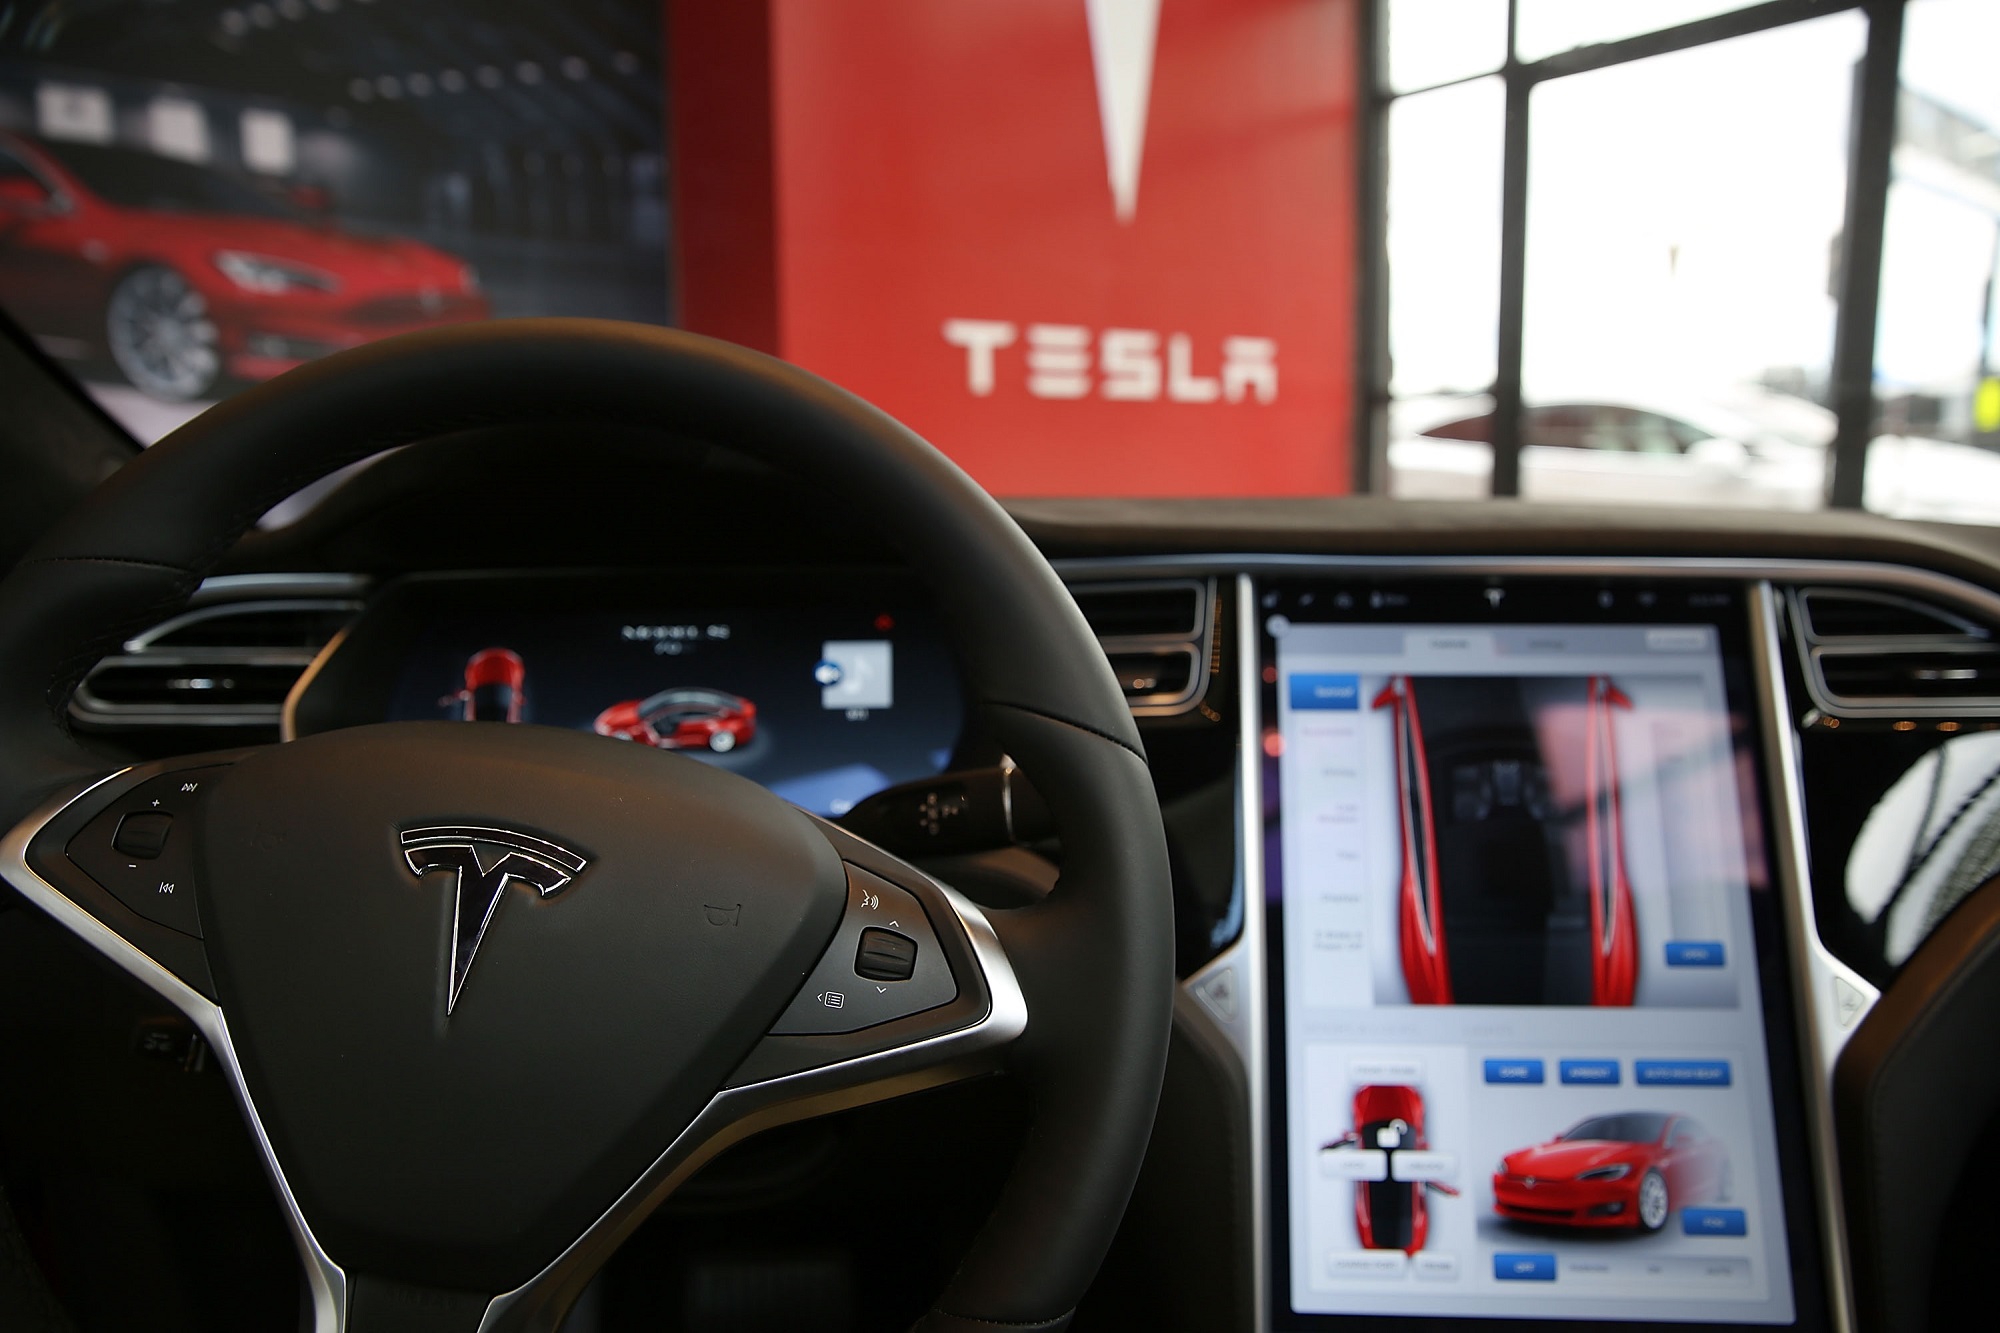 Police chase ensues after Tesla driver falls asleep with autopilot on